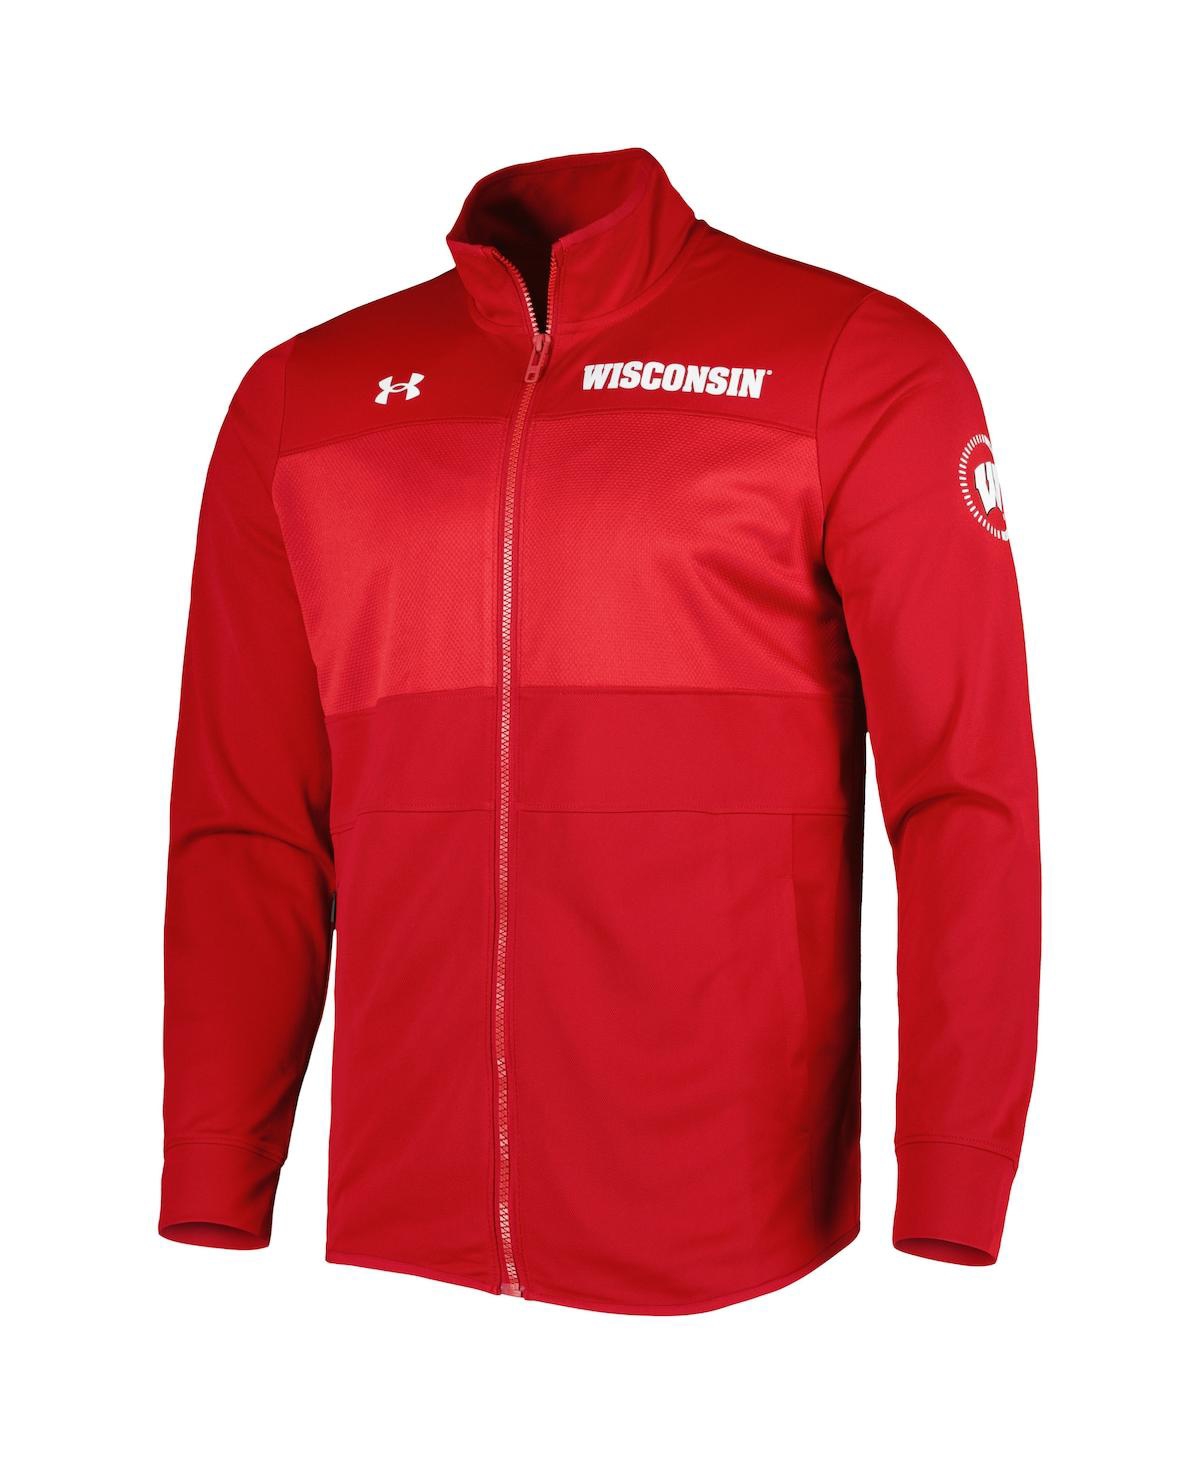 Shop Under Armour Men's  Red Wisconsin Badgers Knit Warm-up Full-zip Jacket